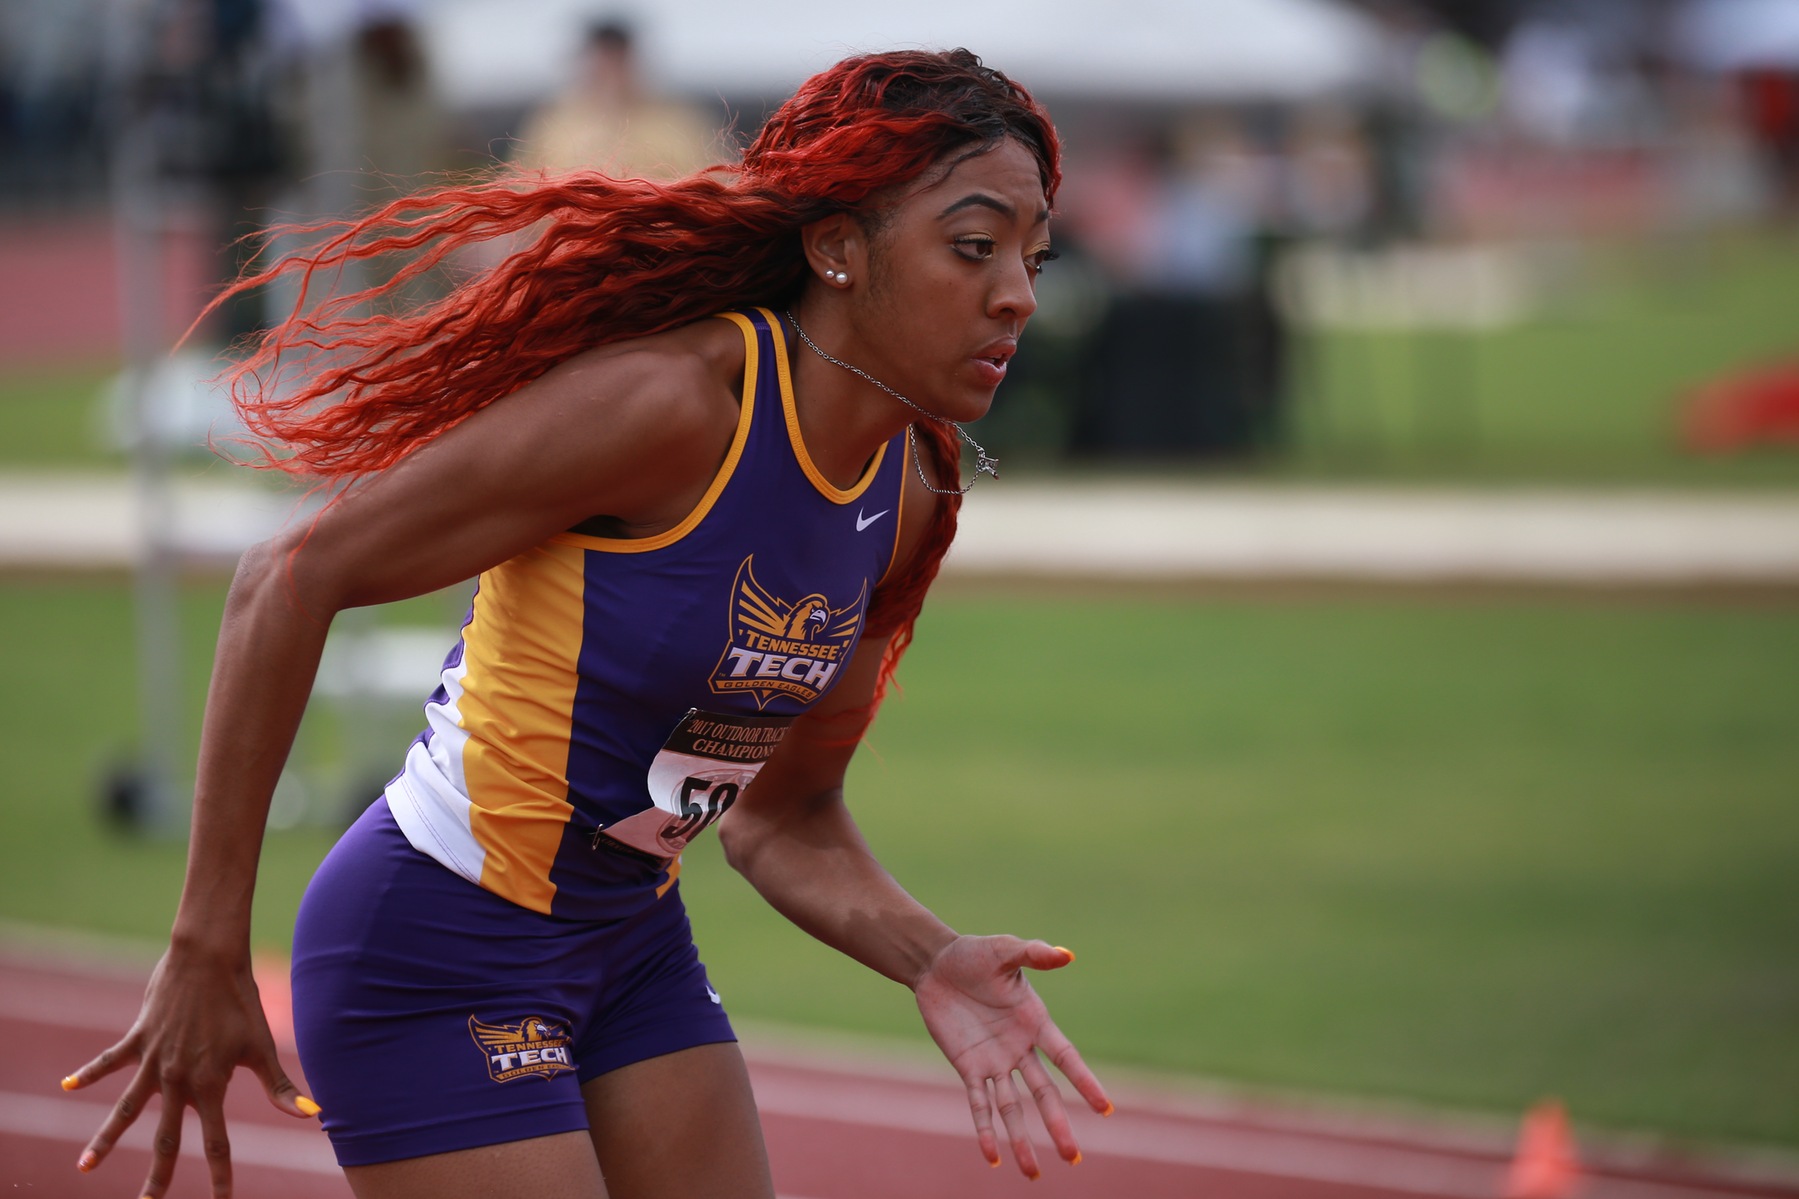 Tech travels to weather-shortened Hilltopper Relays